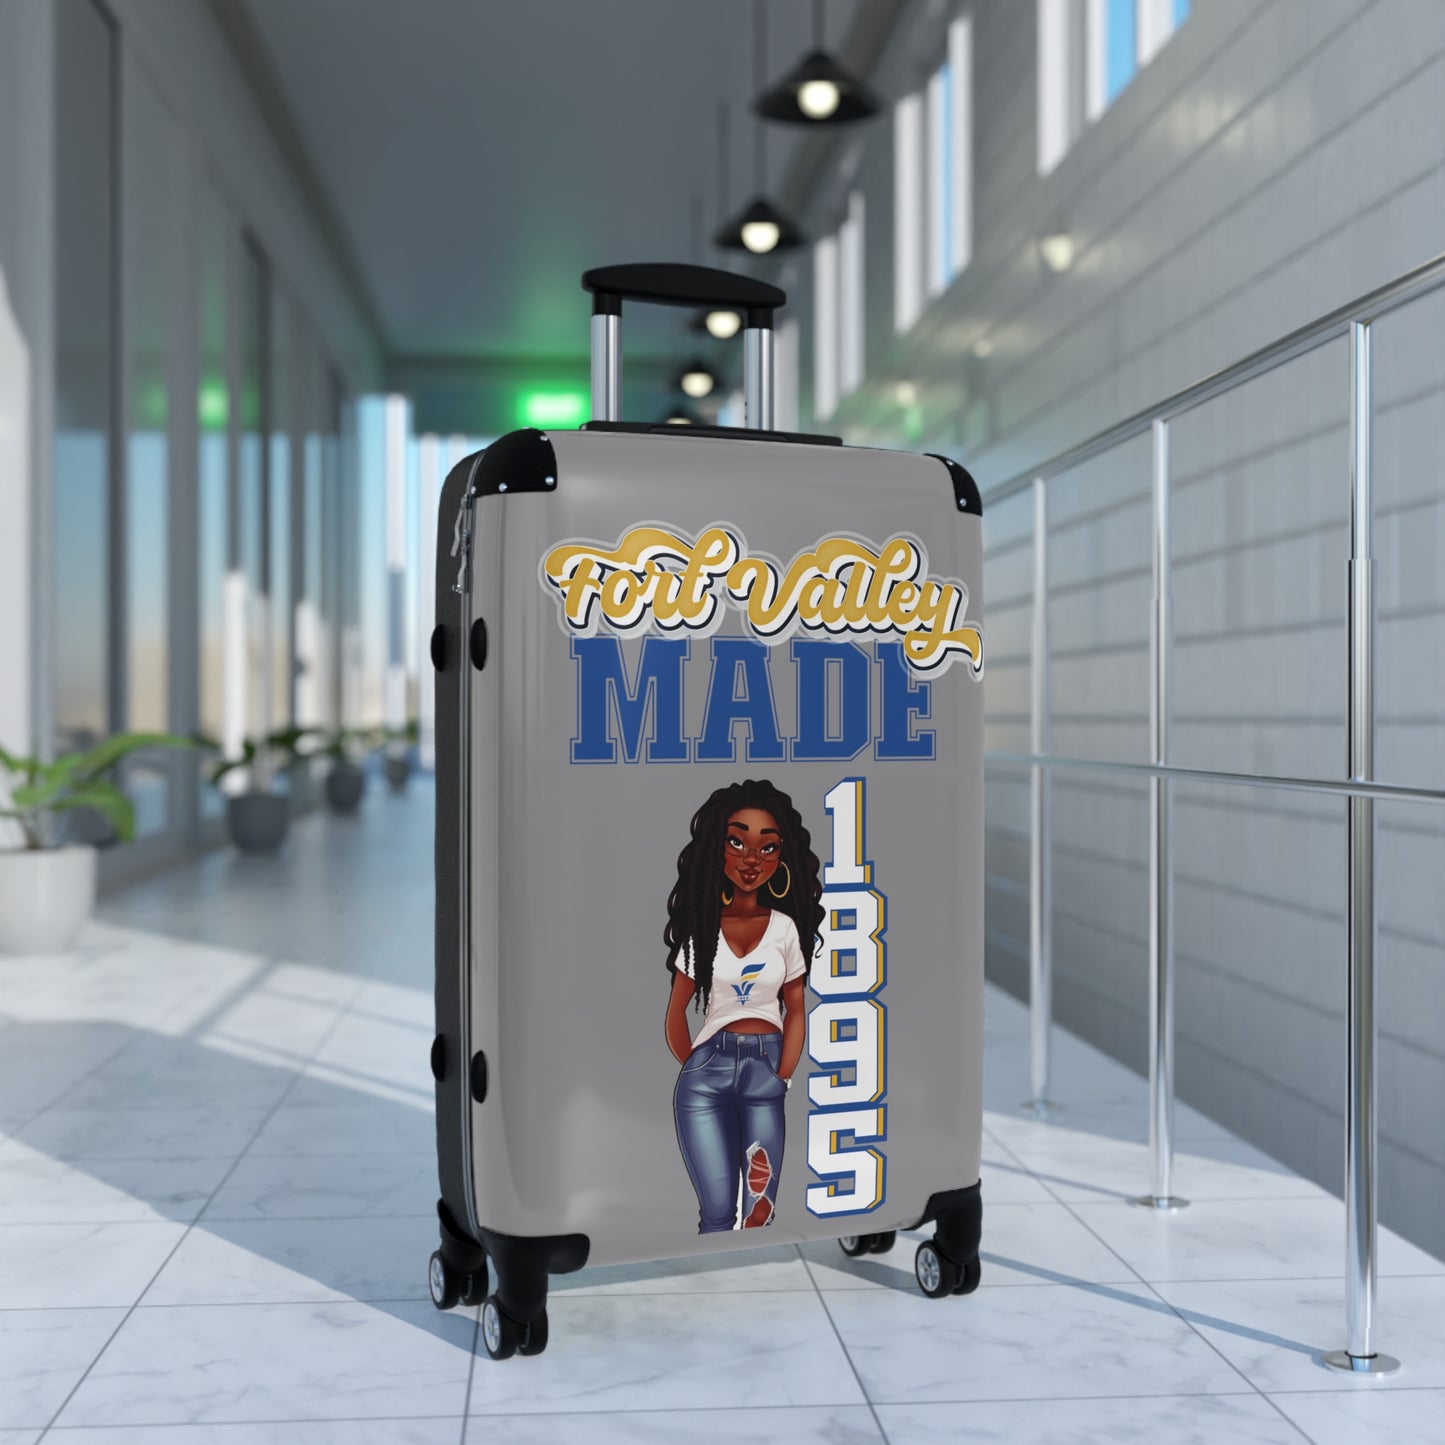 HBCU Love (Fort Valley State University Made/ Suitcase)